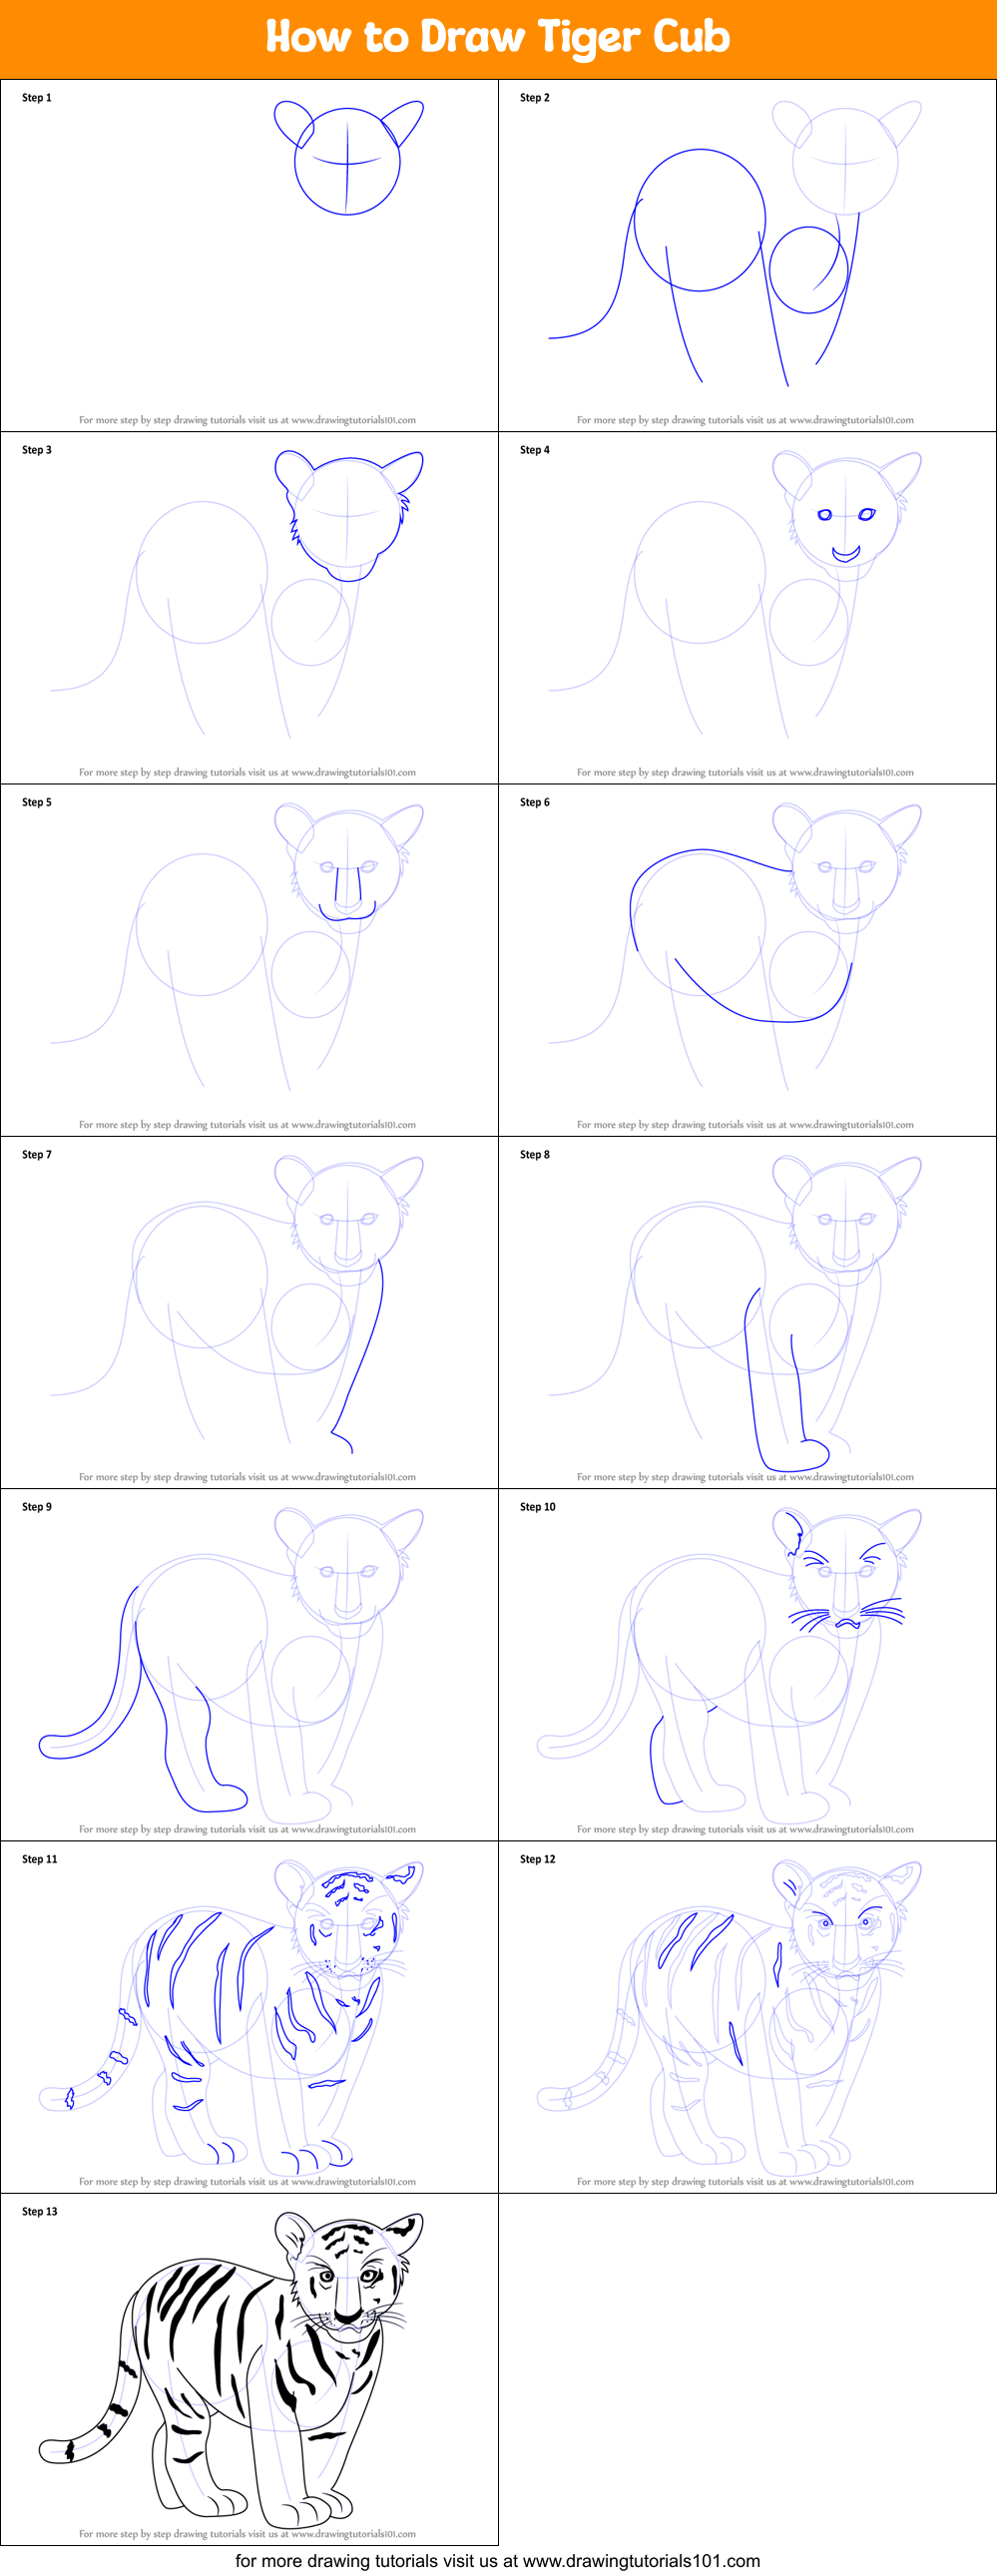 How to Draw Tiger Cub printable step by step drawing sheet